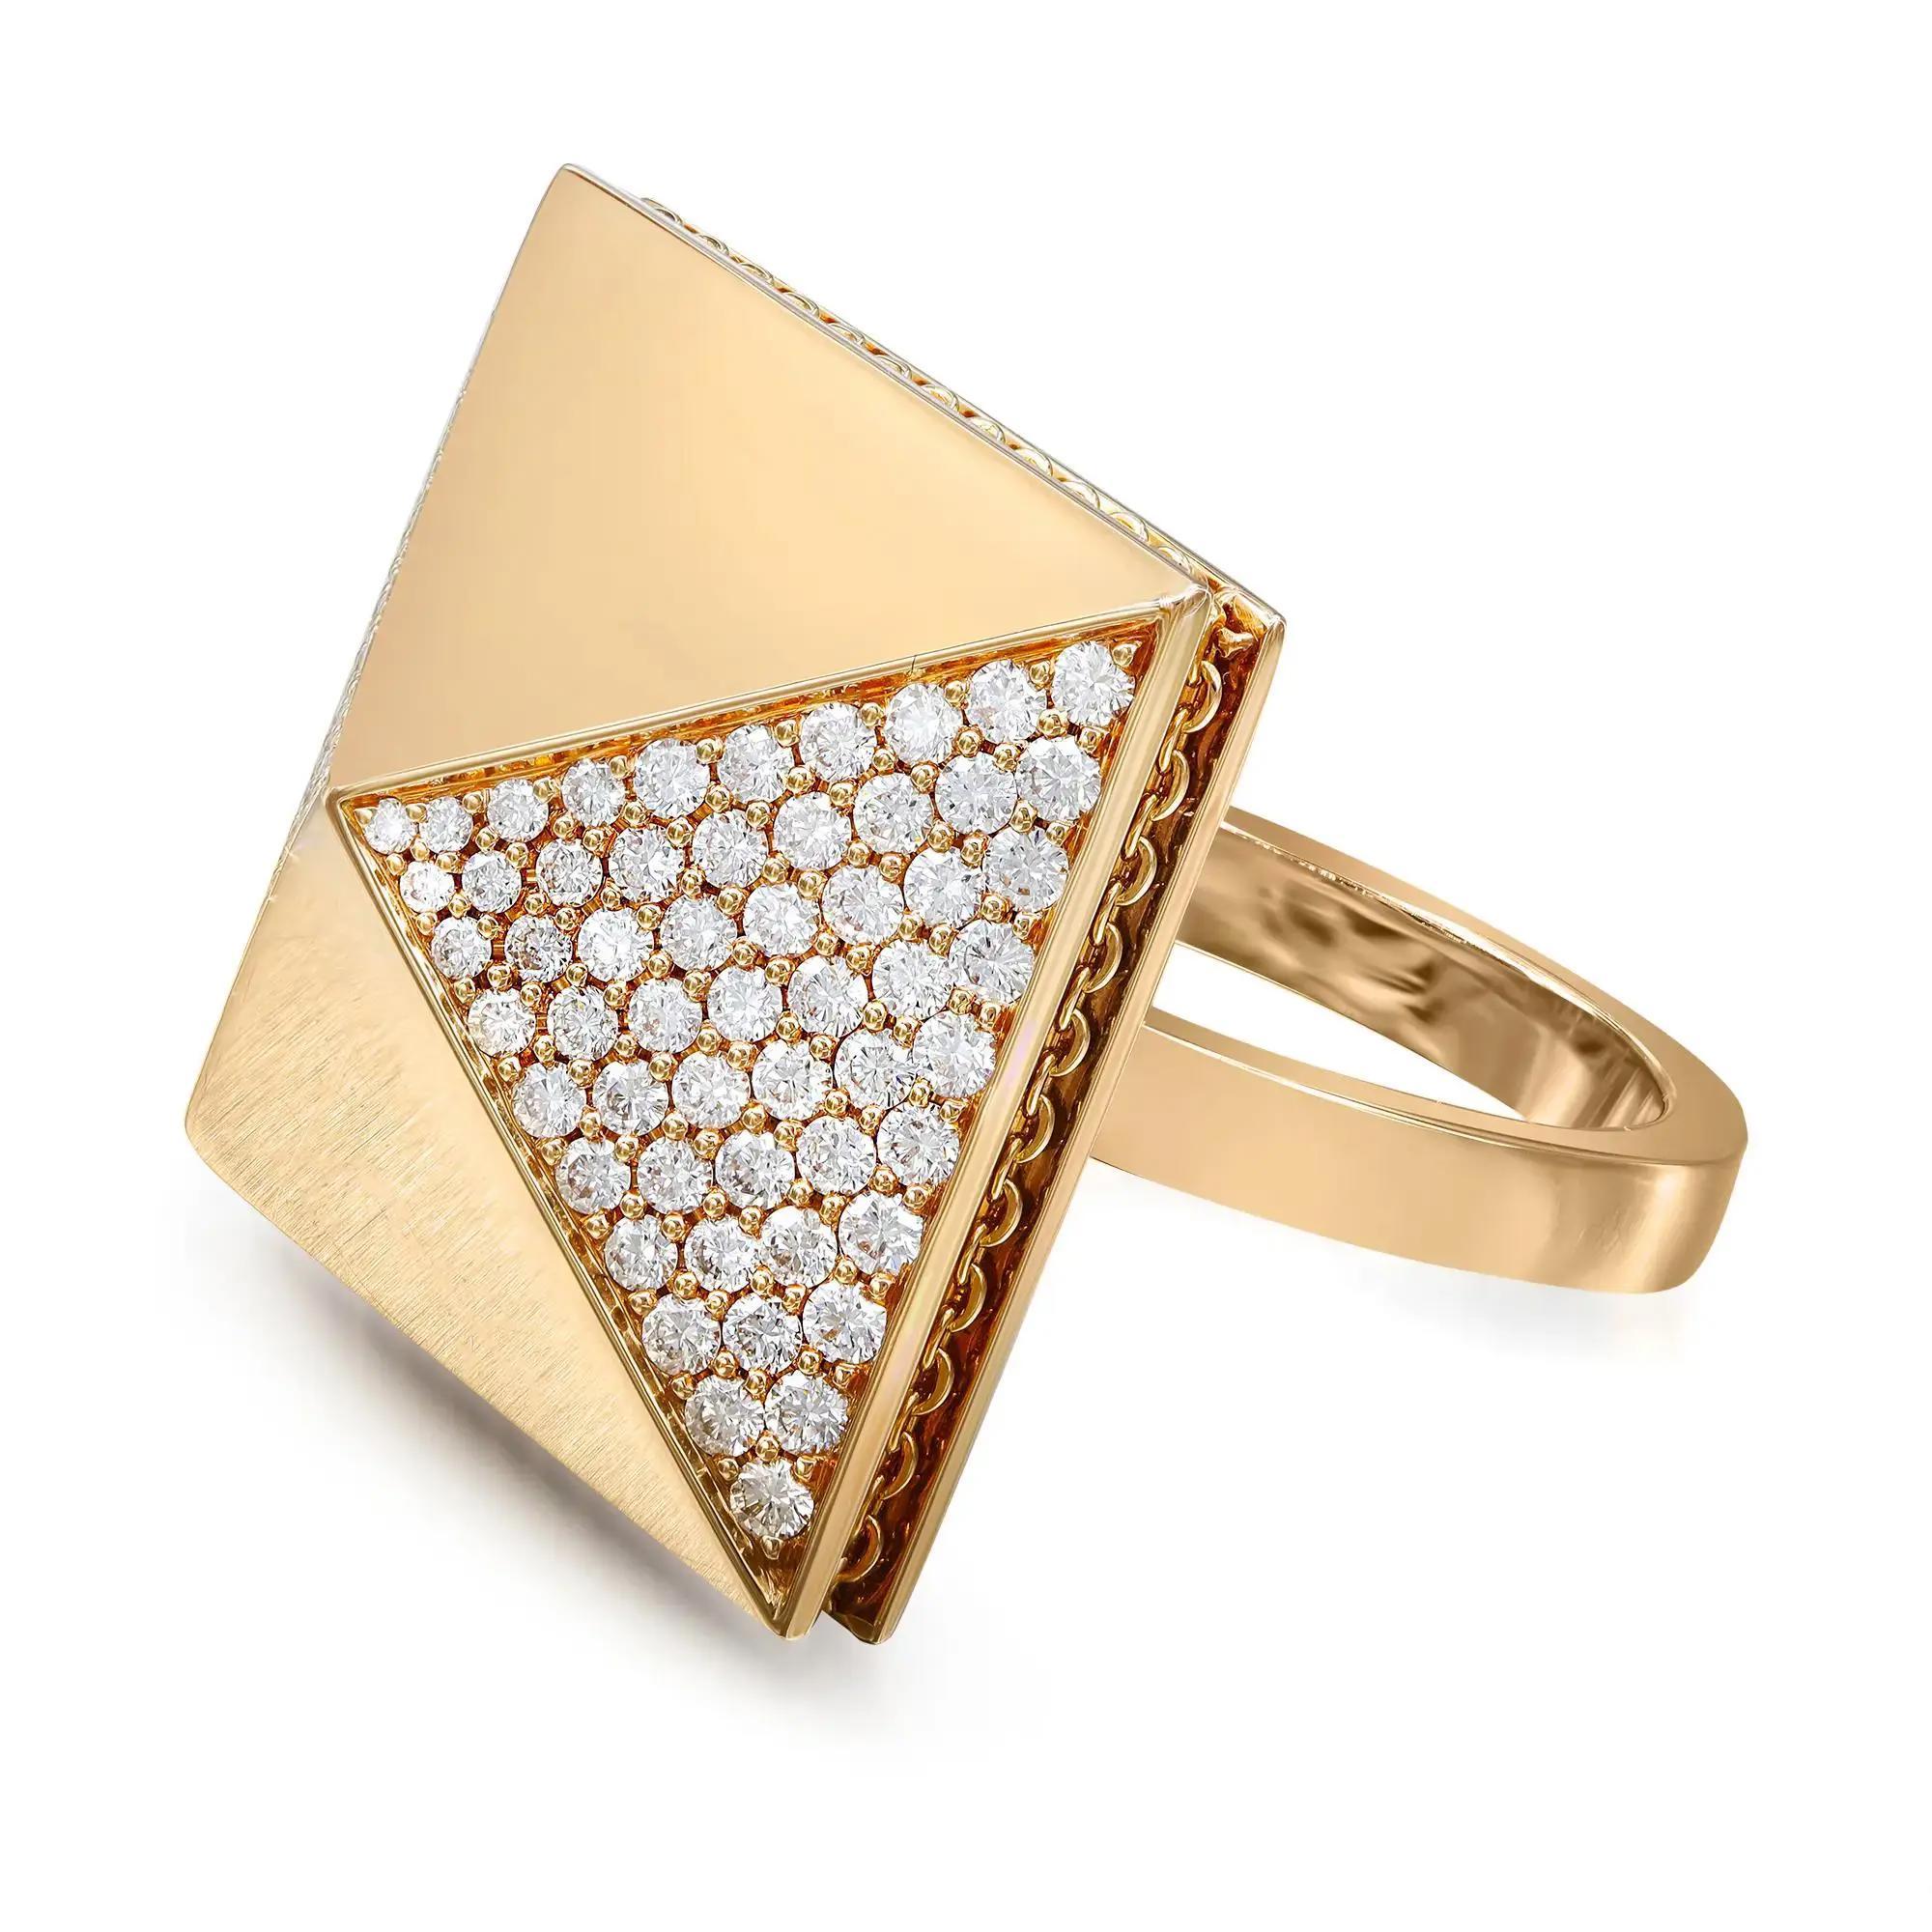 Round Cut Messika 1.11Cttw Spiky Diamond Cocktail Ring 18K Rose Gold Size 53 US 6.5 For Sale